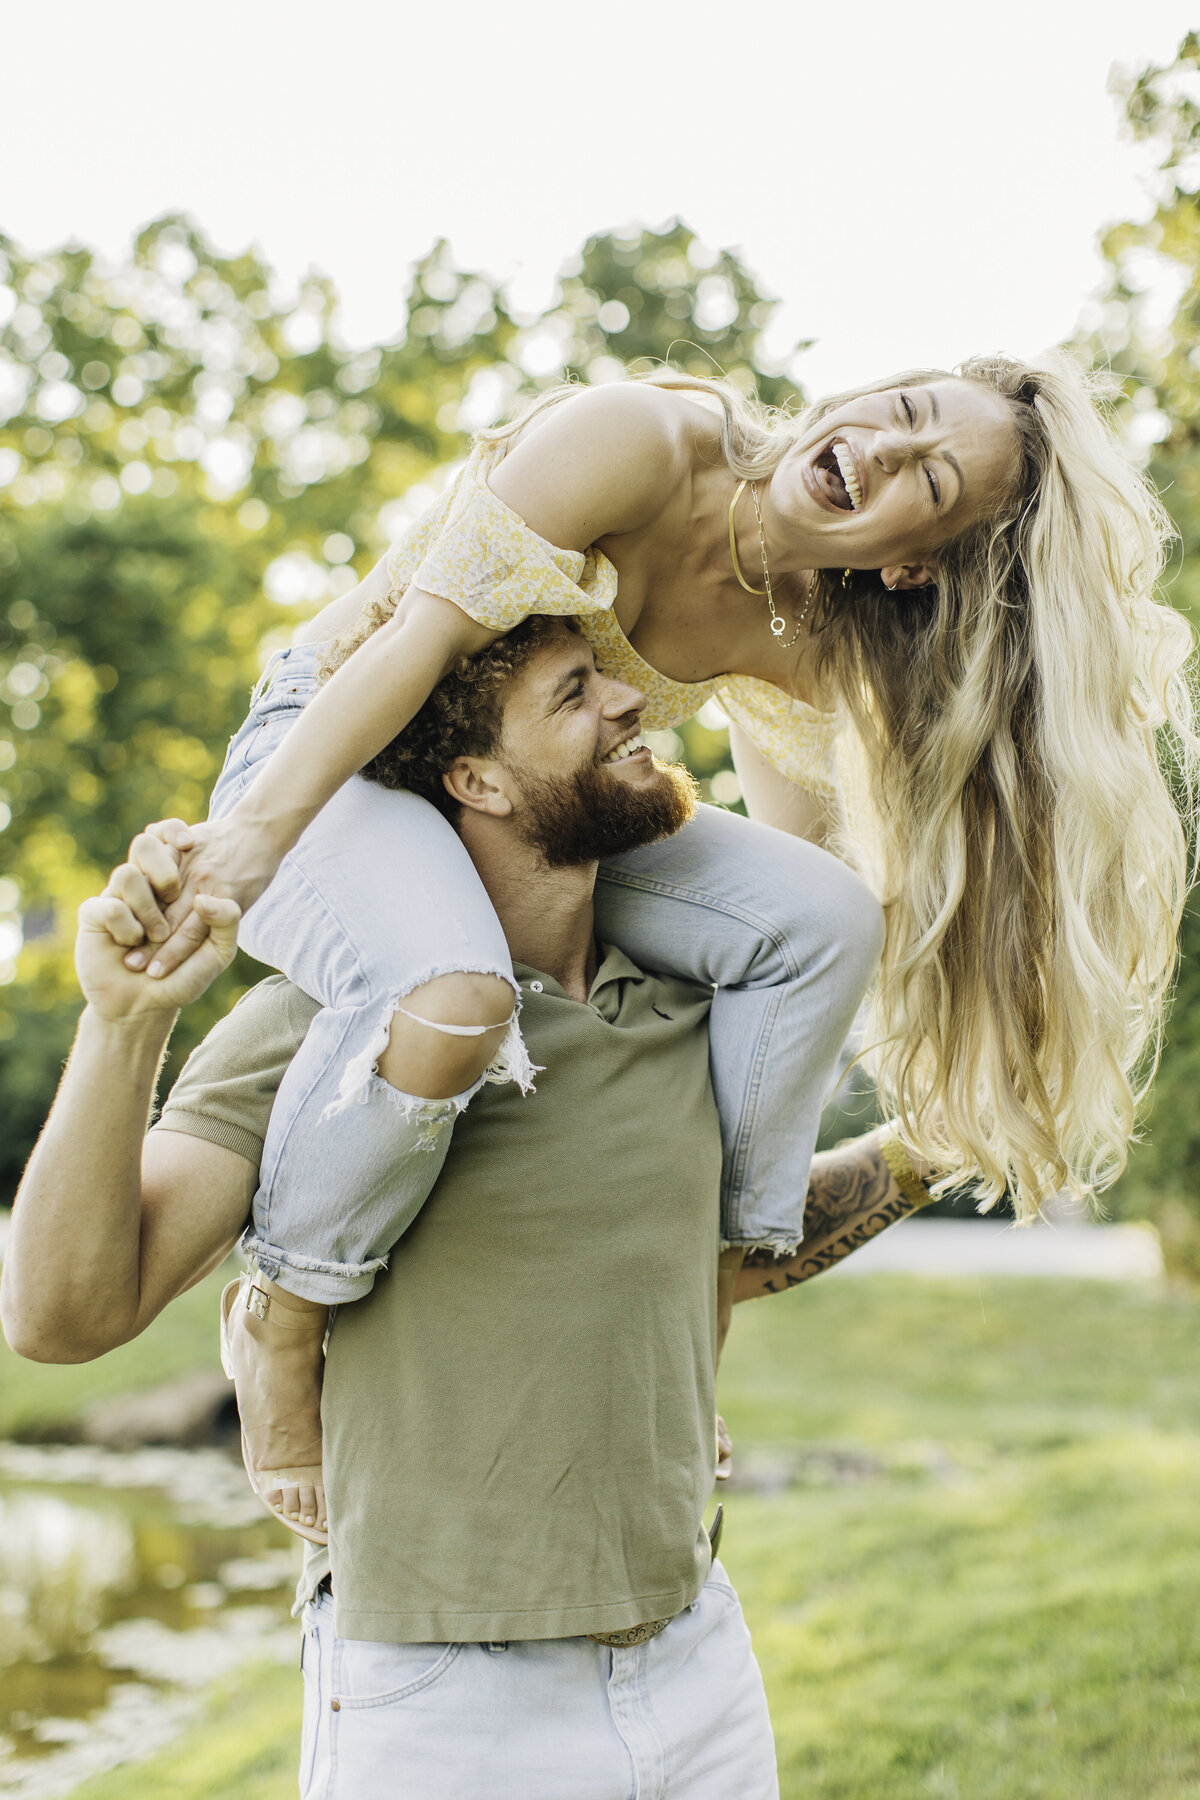 Man grinning as girlfriend sits on his shoulders